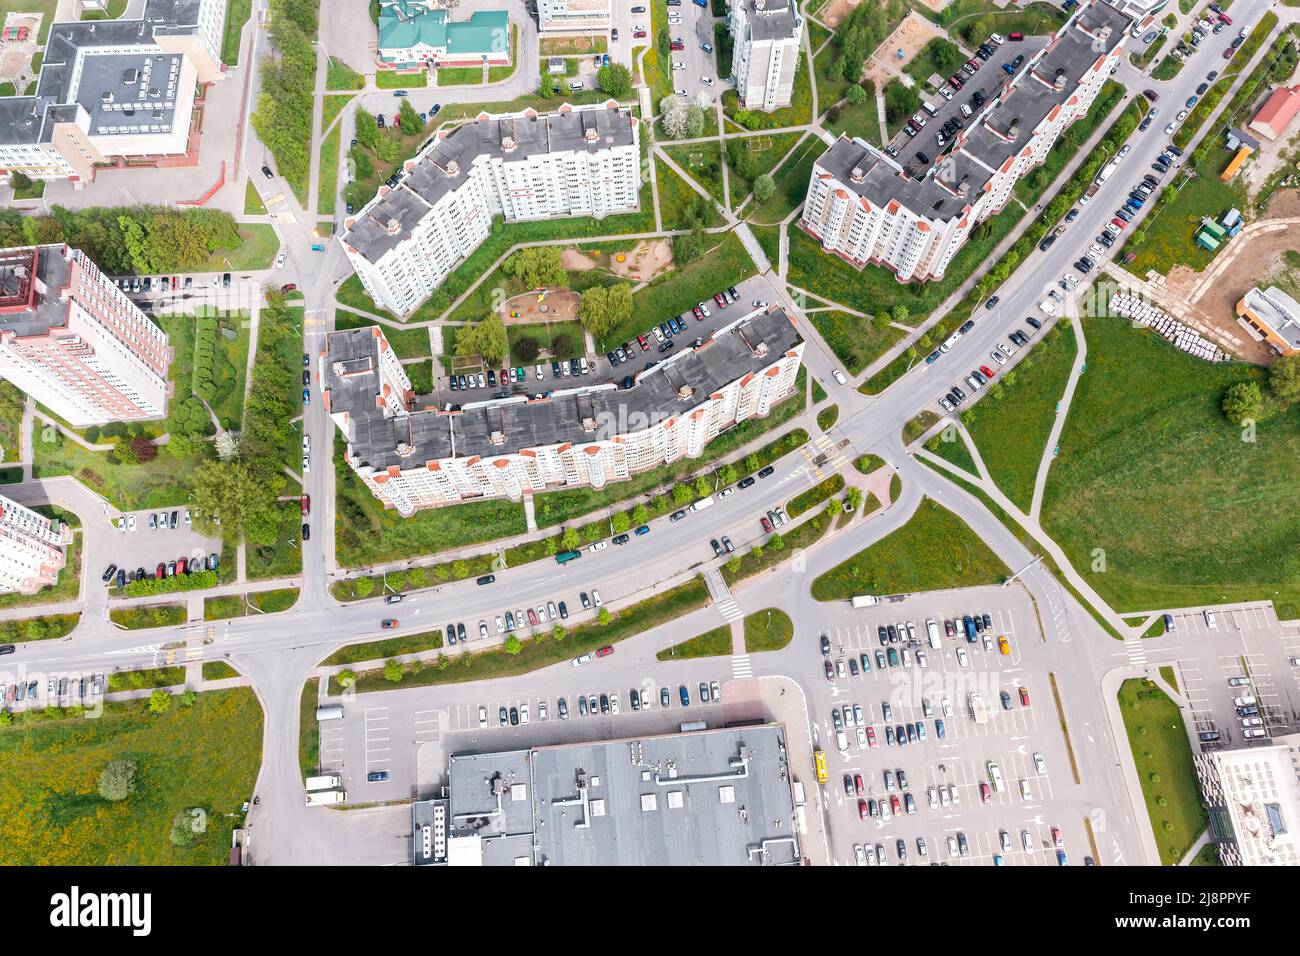 aerial view of city residential area with shopping center and parking lot with cars Stock Photo